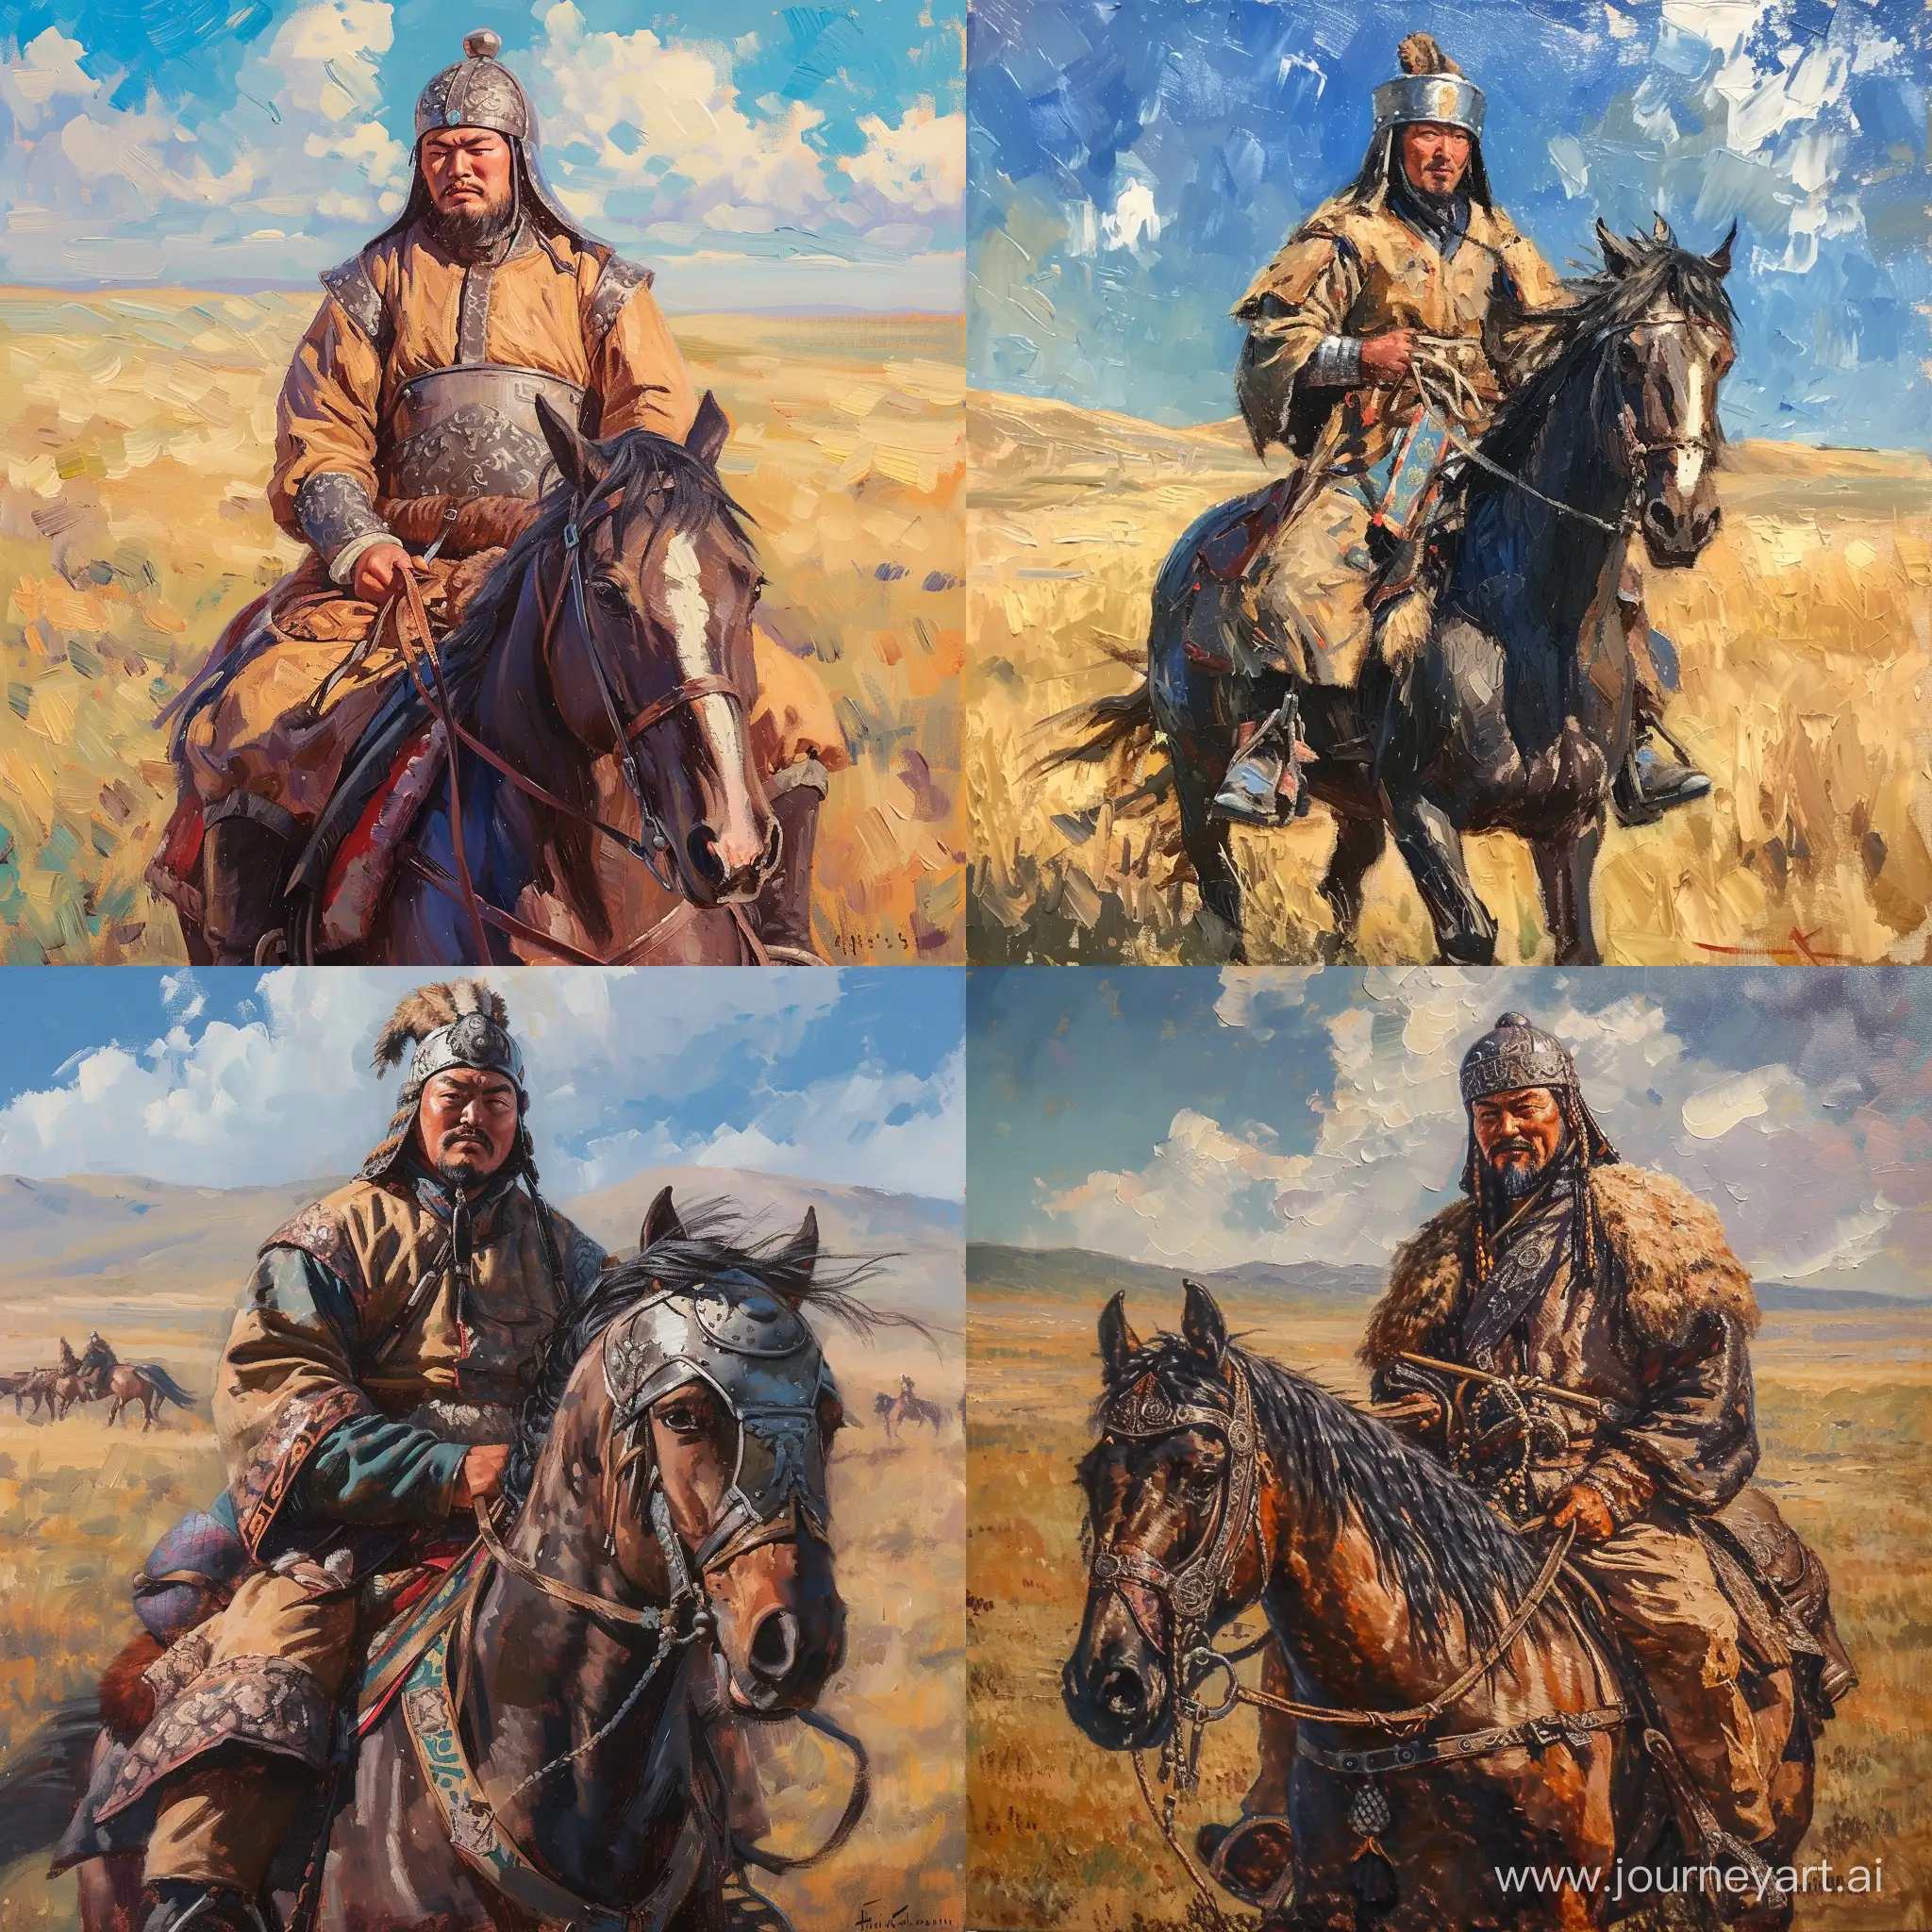 Genghis Khan on his horse. Mongolian steppe. Wearing traditional attire and helmet. Oil painting. Brush strikes.